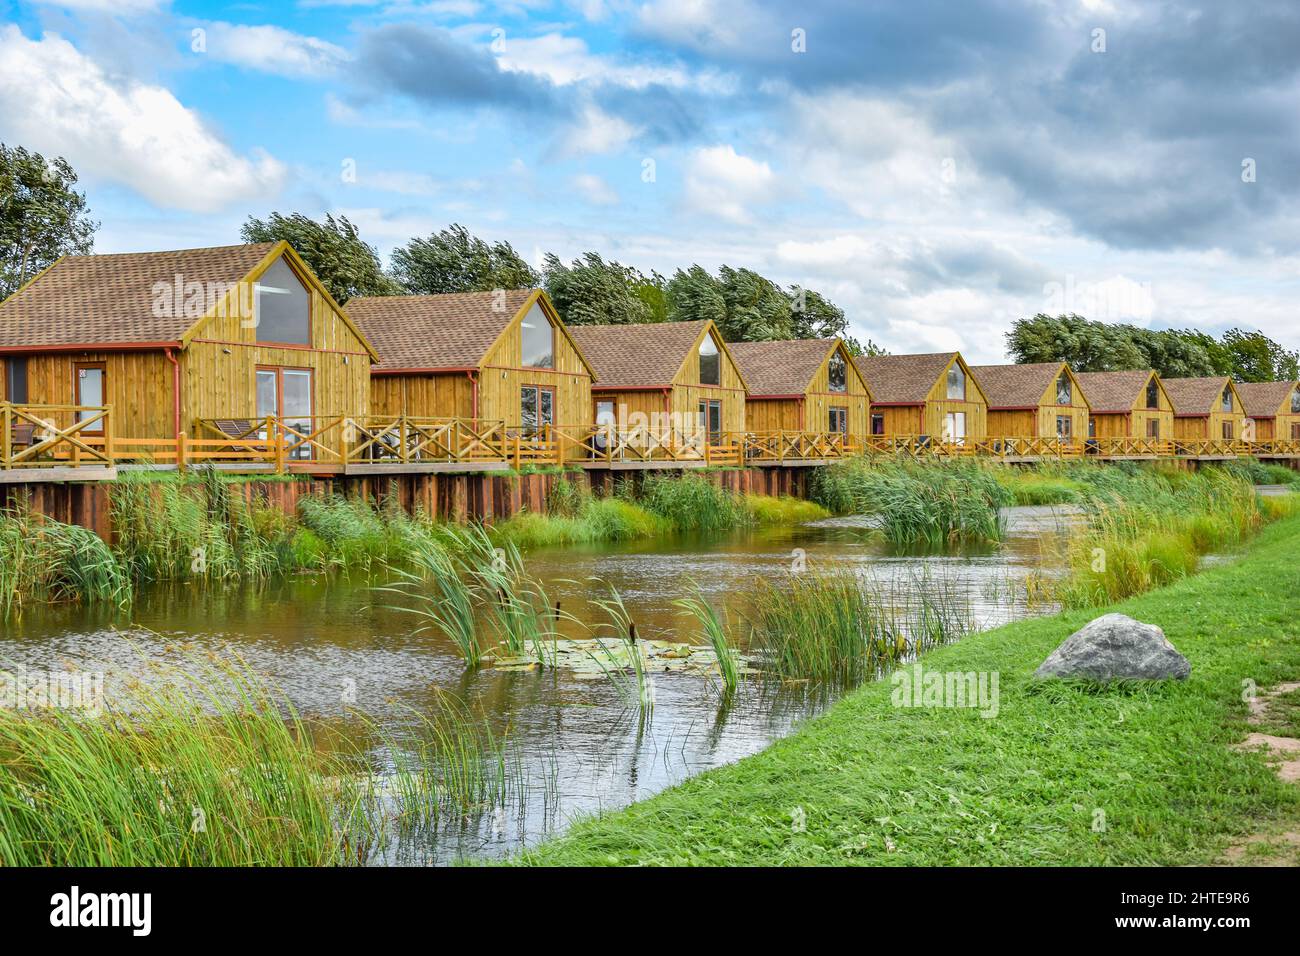 Dreverna is a small town in Lithuania Stock Photo